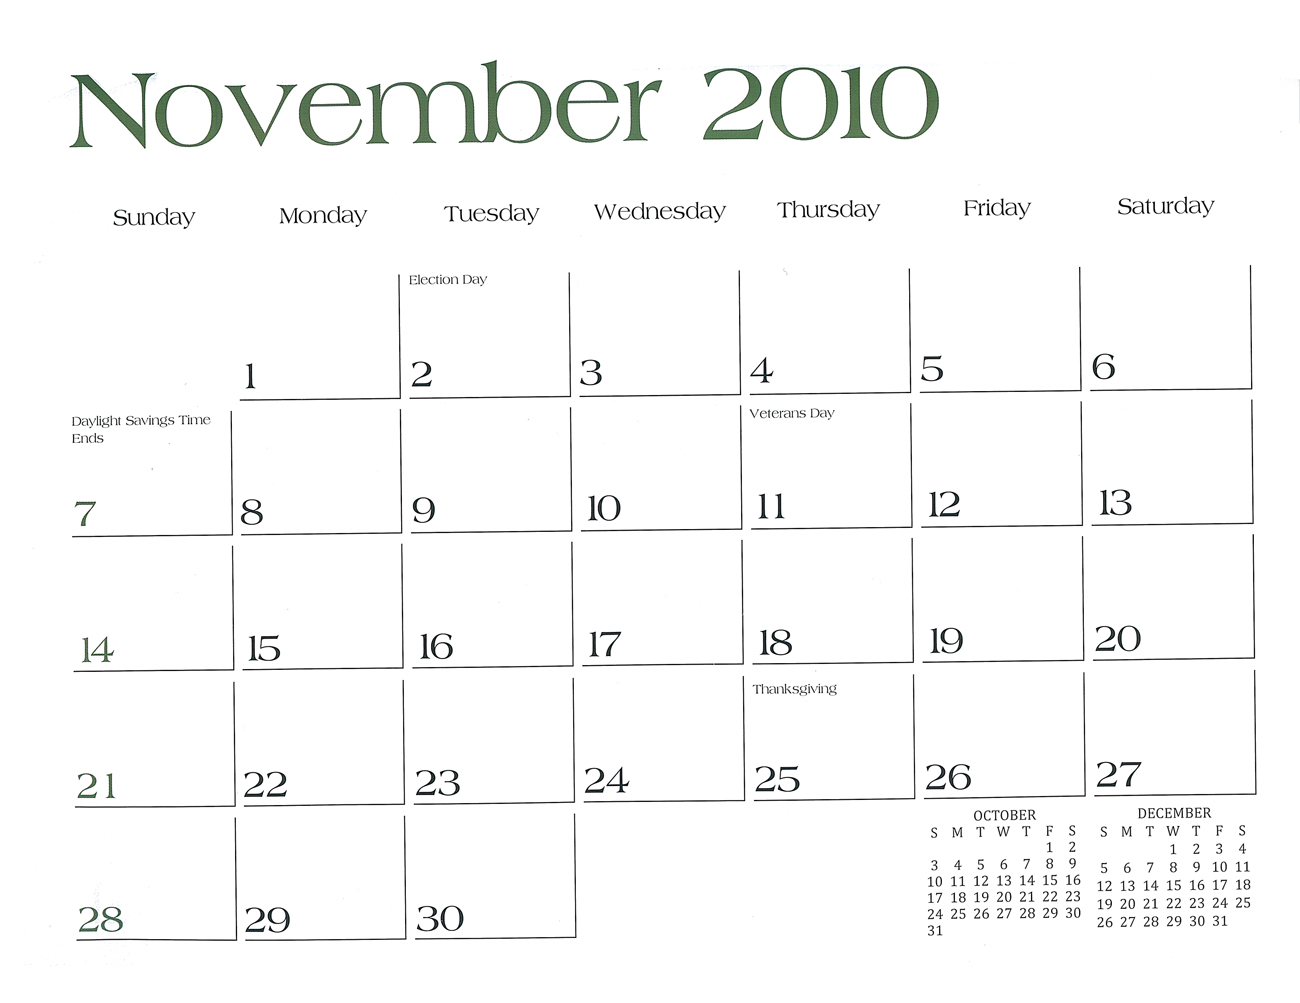 2010 Prophecy Calendar: November - Israel will recognize Christ as its Messiah